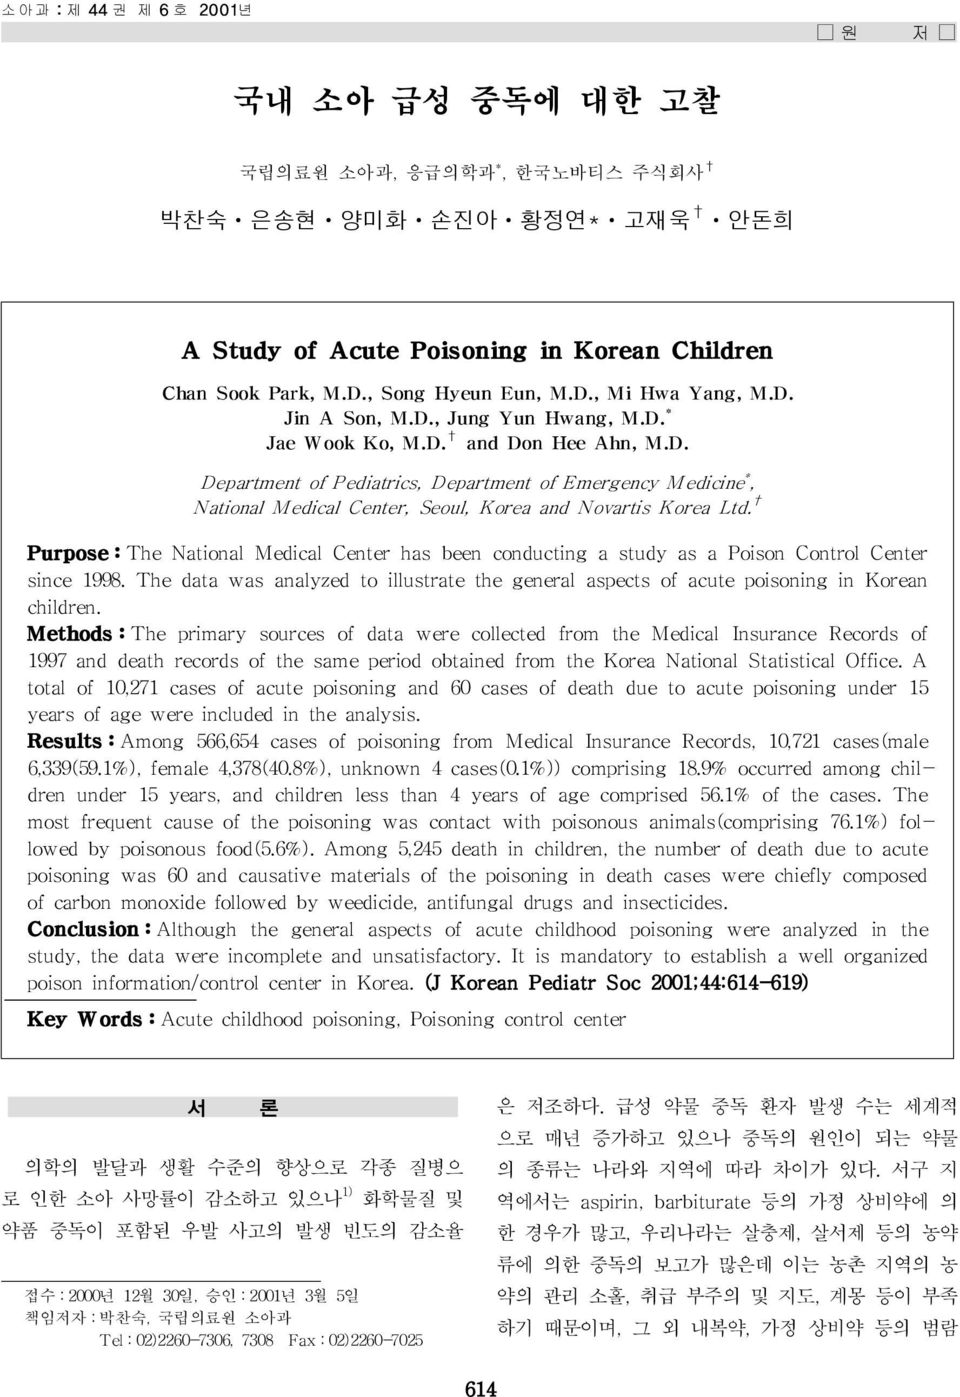 Purpose : The National Medical Center has been conducting a study as a Poison Control Center since 8. The data was analyzed to illustrate the general aspects of acute poisoning in Korean children.